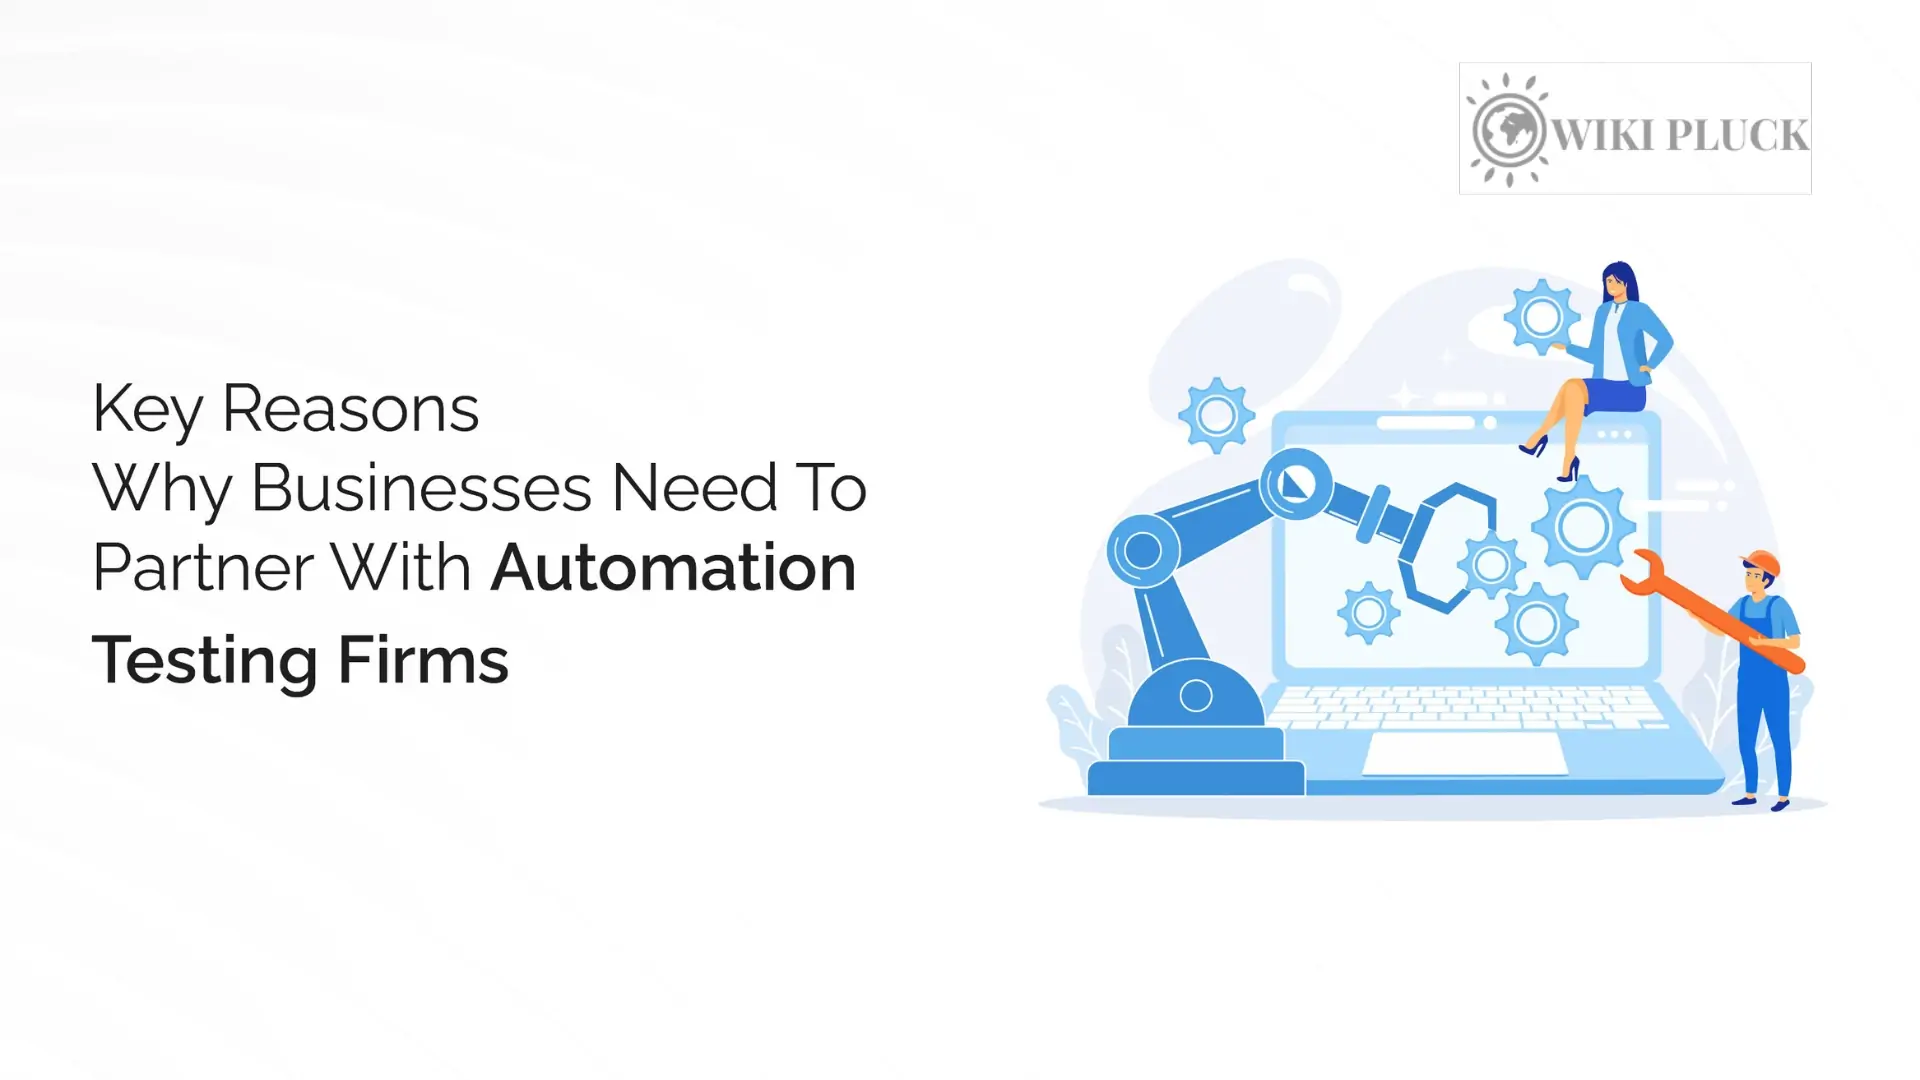 Why Businesses Need To Partner With Automation Testing